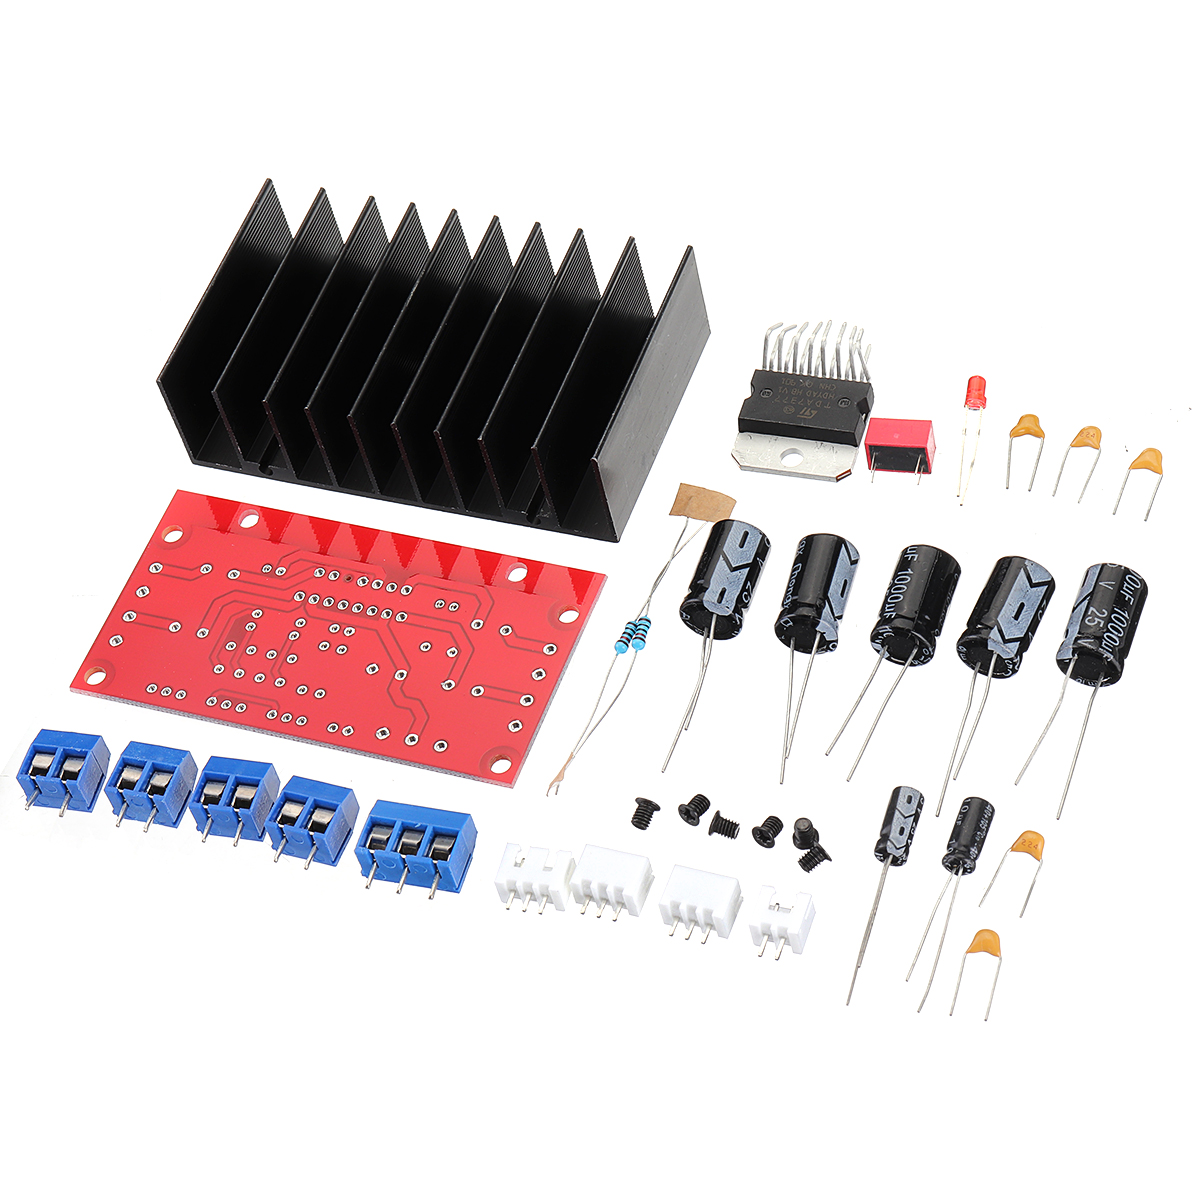 

TDA7377 4 Channel Power Amplifier Kit Supports Stereo Surround Input